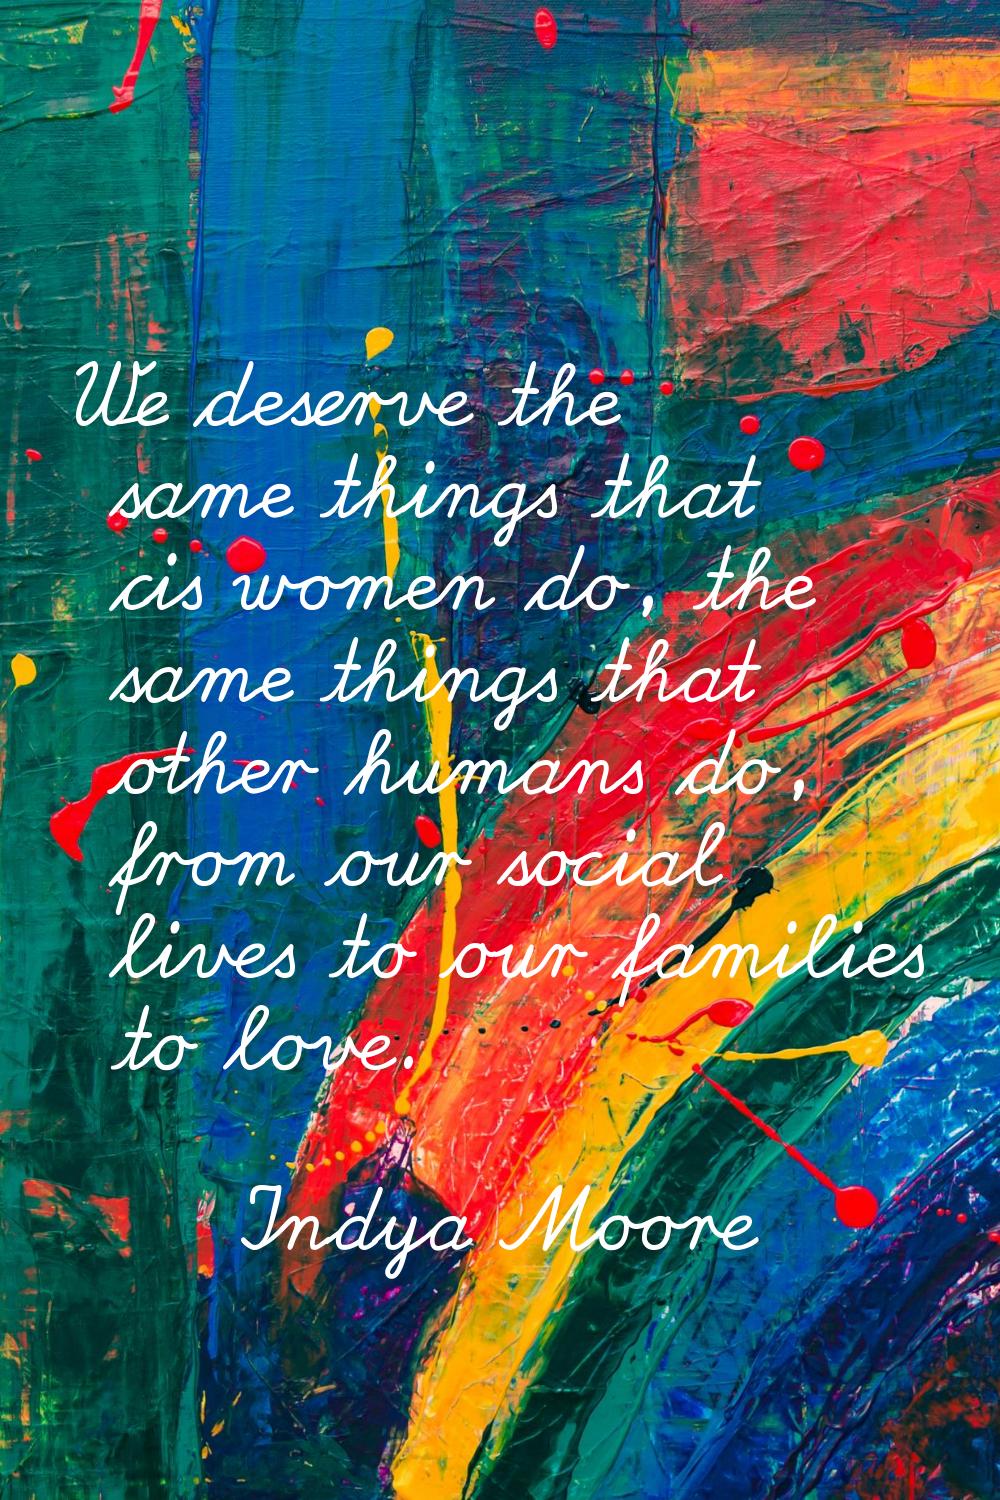 We deserve the same things that cis women do, the same things that other humans do, from our social